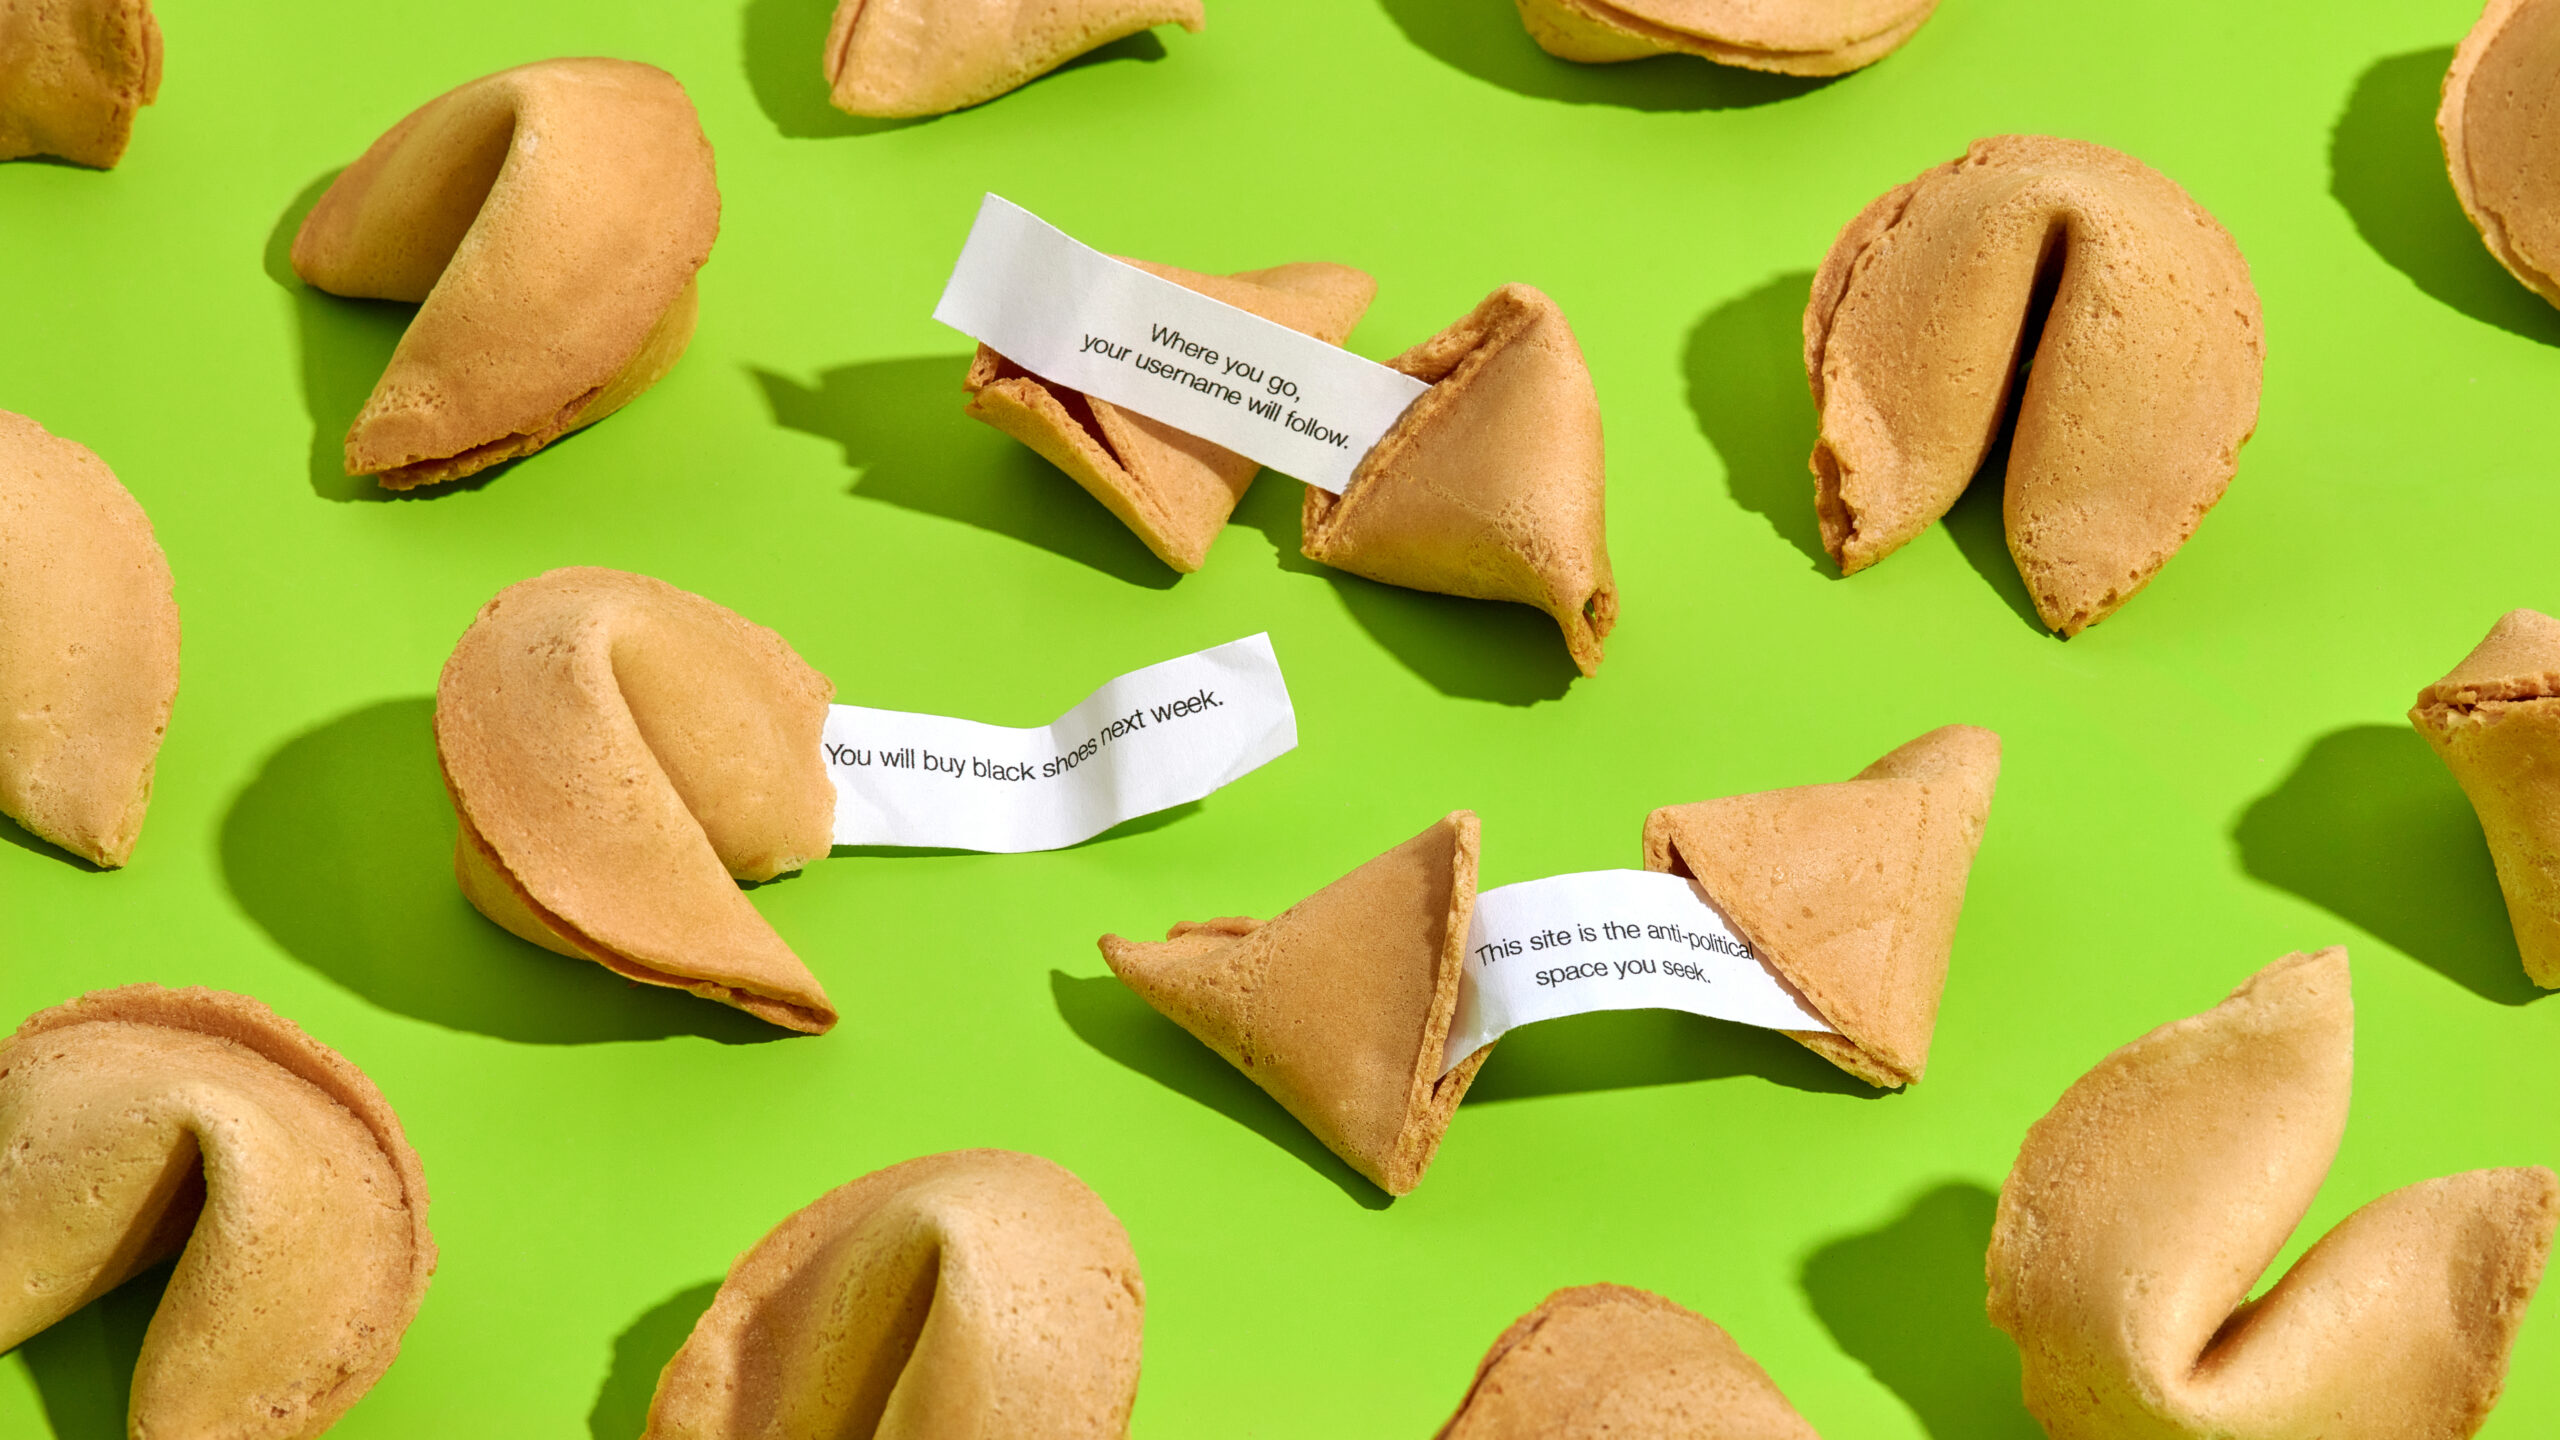 A number of fortune cookies on a green surface, three of which have exposed fortunes reading "Where you go, your username will follow," "You will buy black shoes next week," and "This site is the anti-political space you seek."